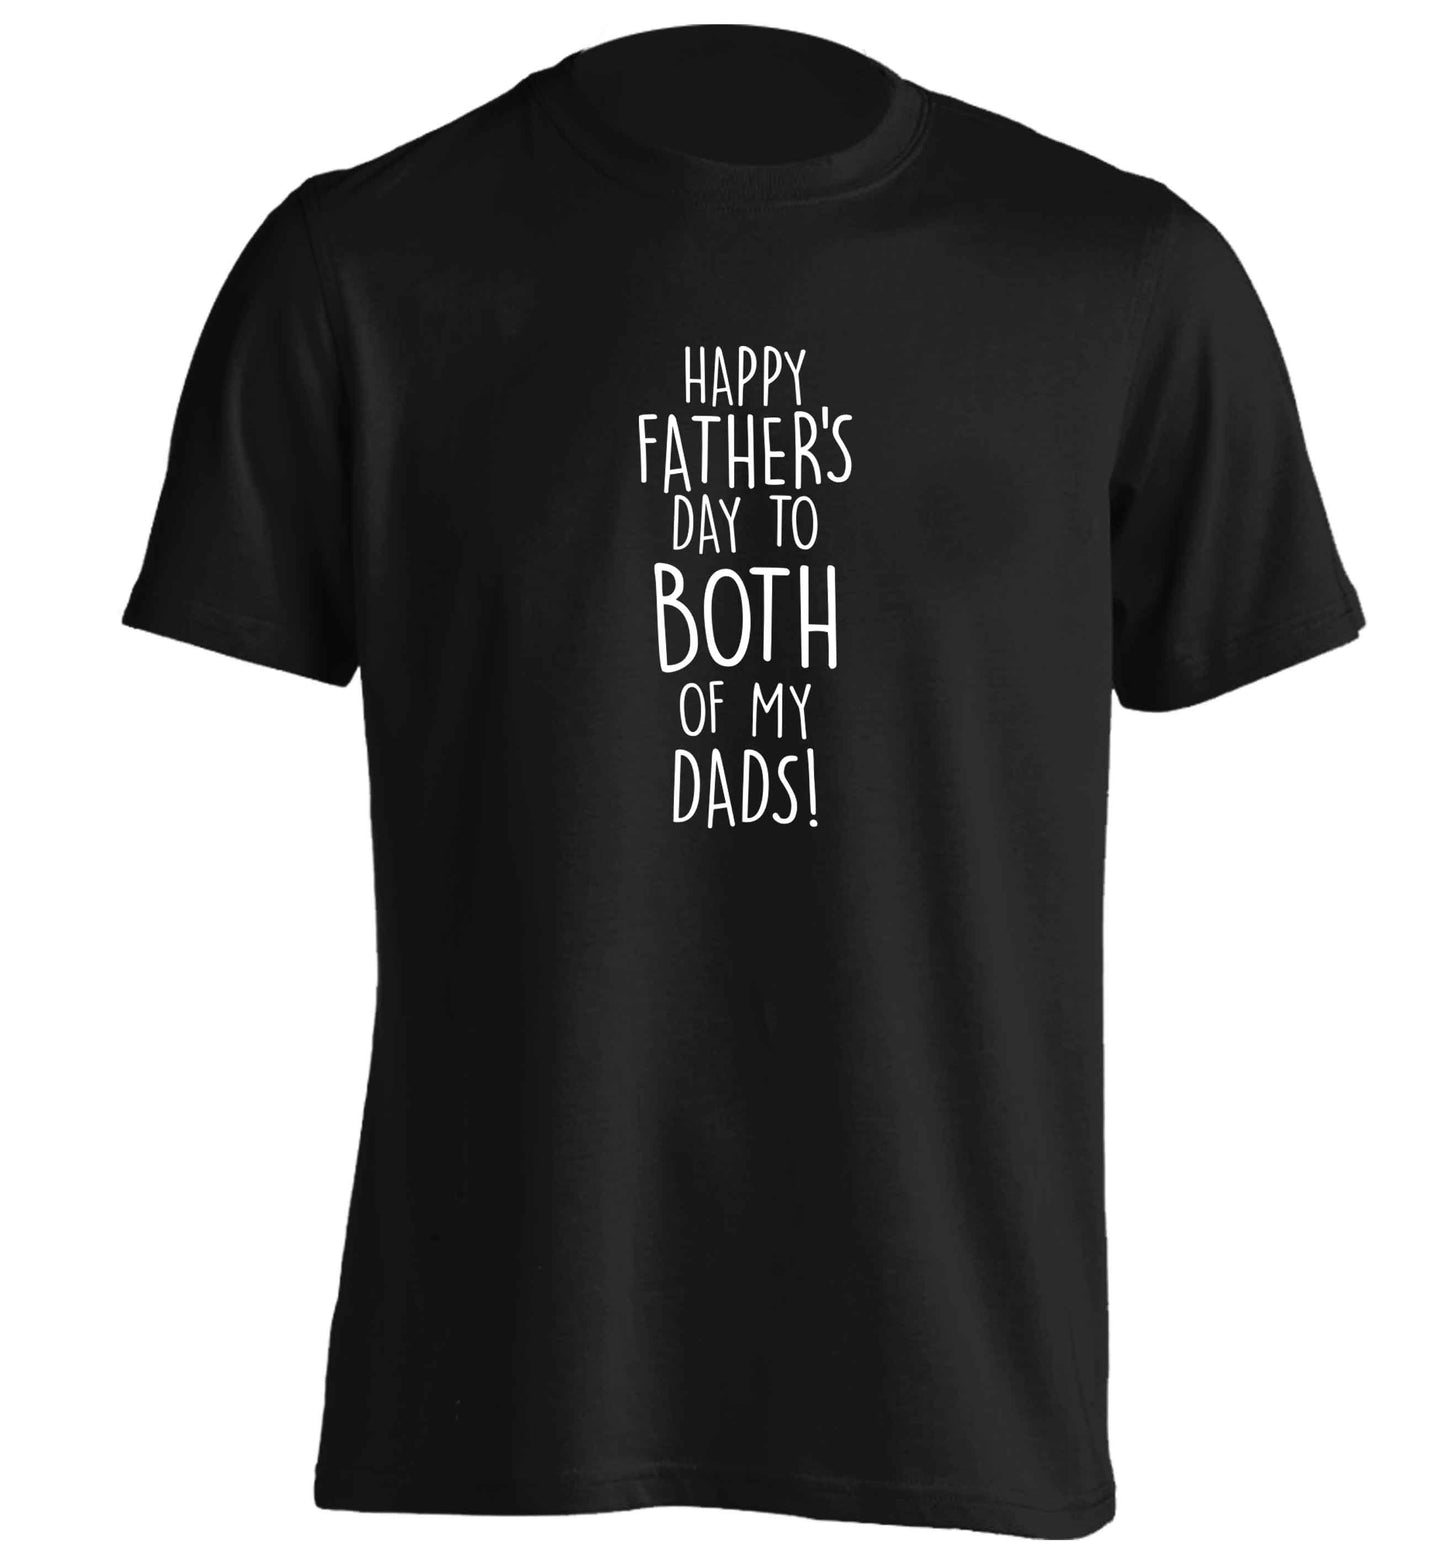 Happy Father's day to both of my dads adults unisex black Tshirt 2XL